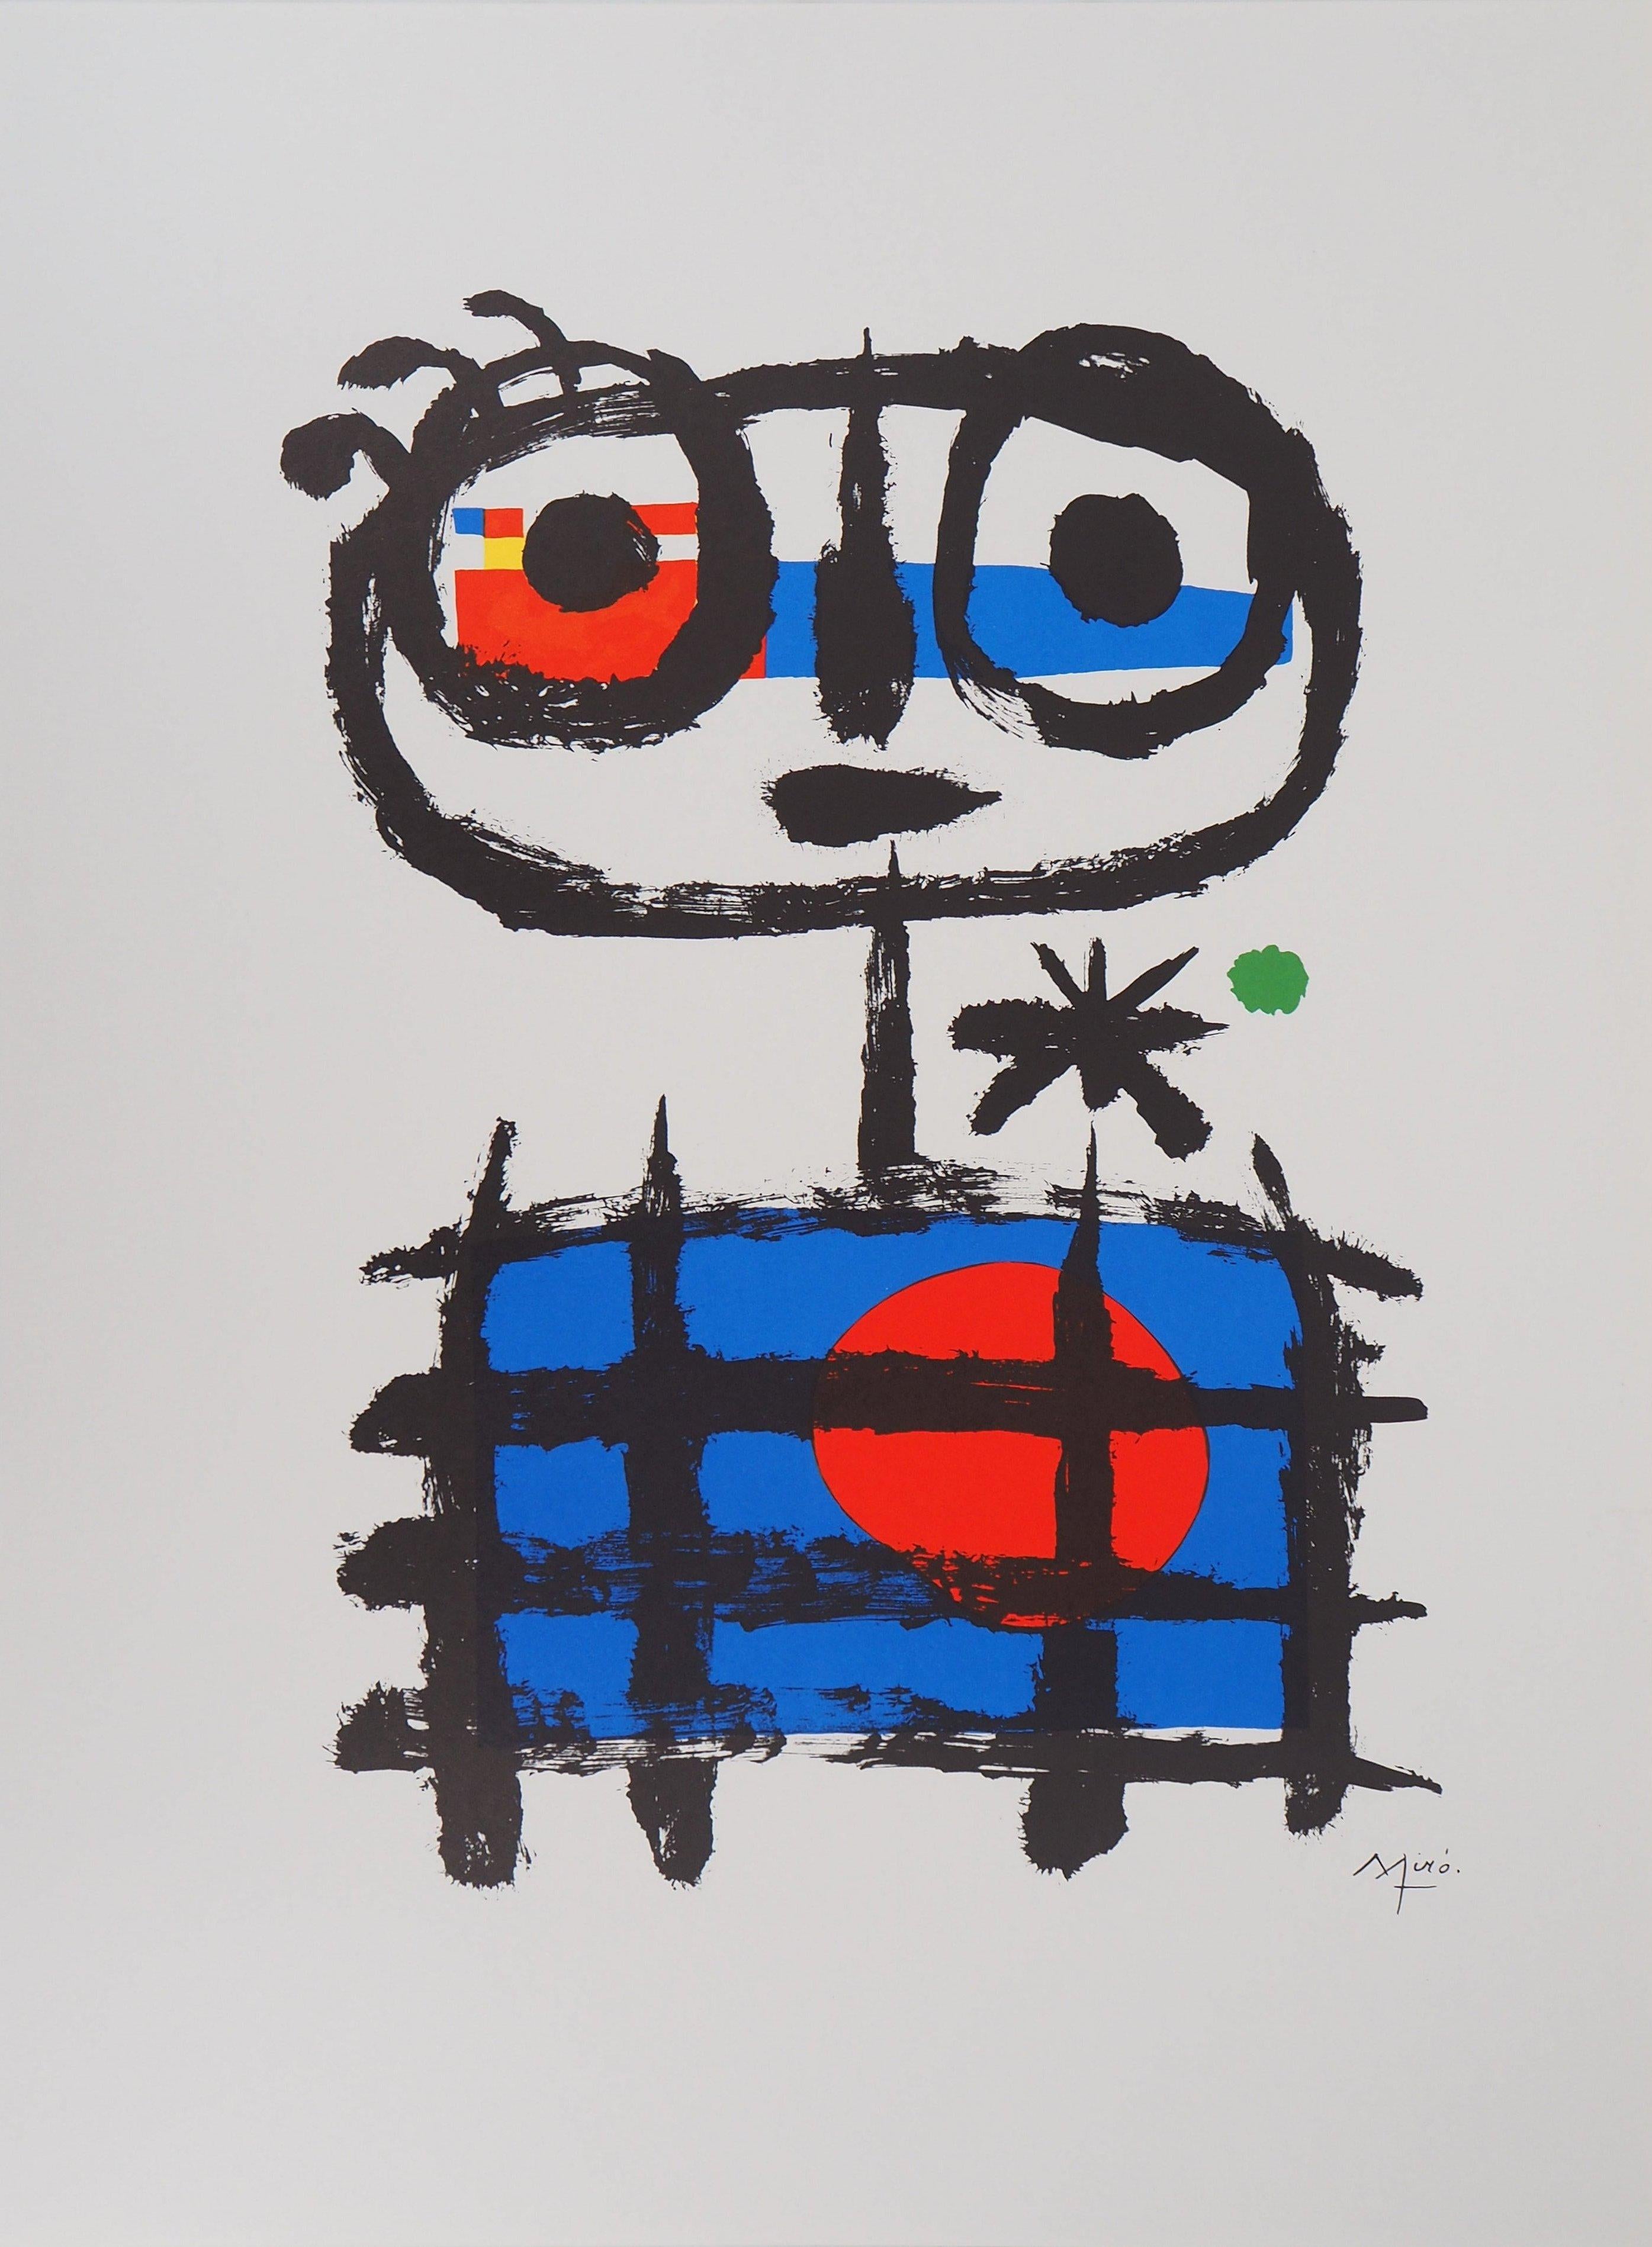 (after) Joan Miró Abstract Print - Imaginary Boy with Red Sun - Lithograph